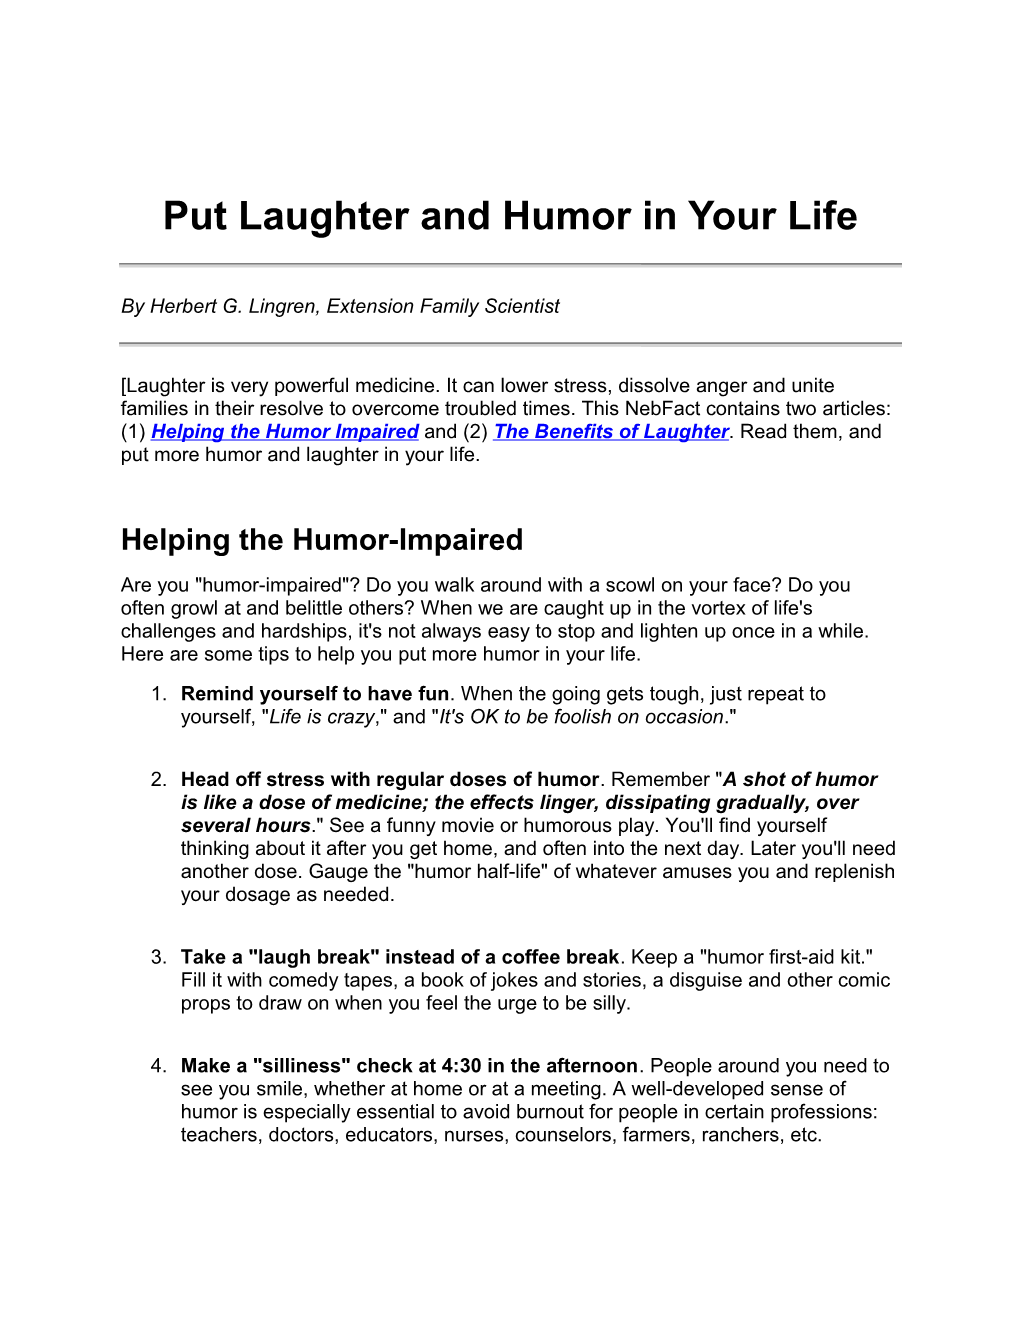 Put Laughter and Humor in Your Life, NF98-389